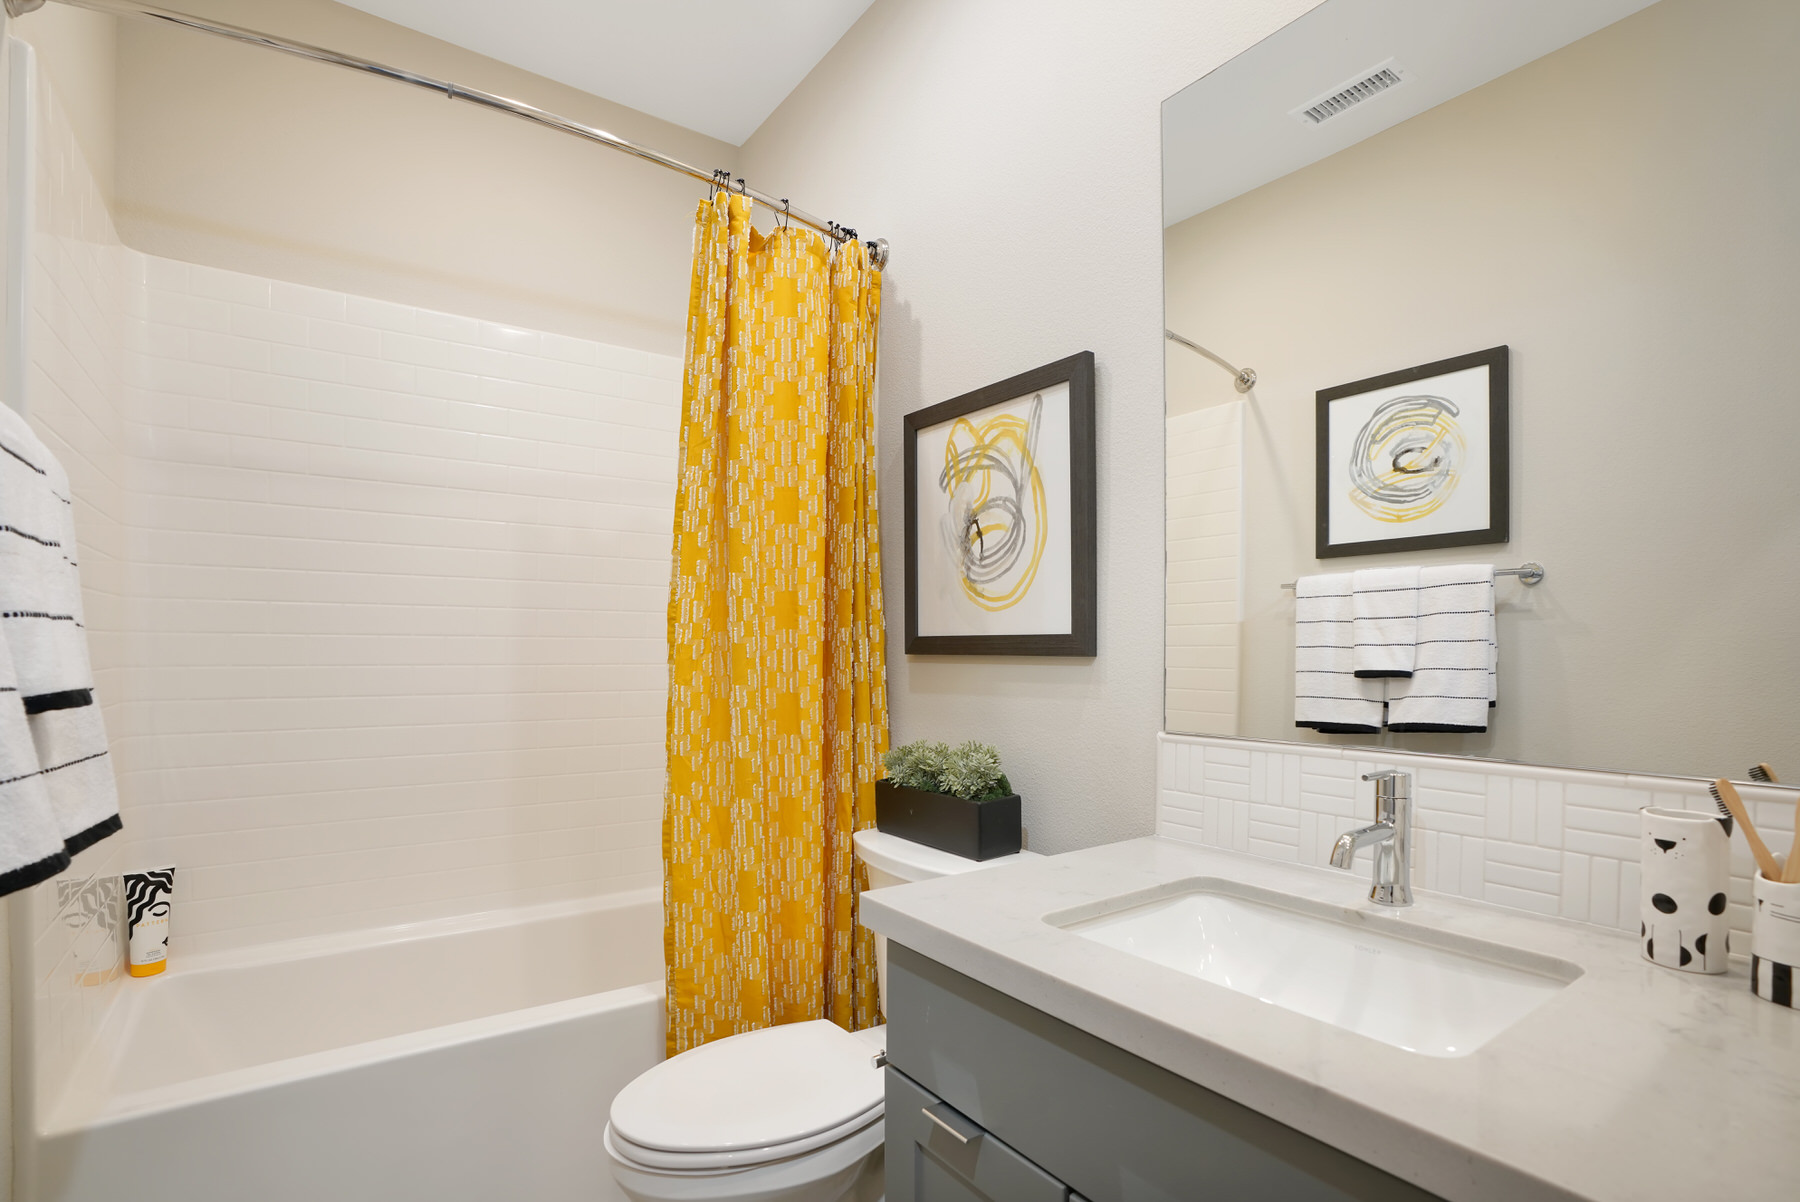 Bath 2 in Plan 3A at Townes at Magnolia by Melia Homes in Anaheim, CA